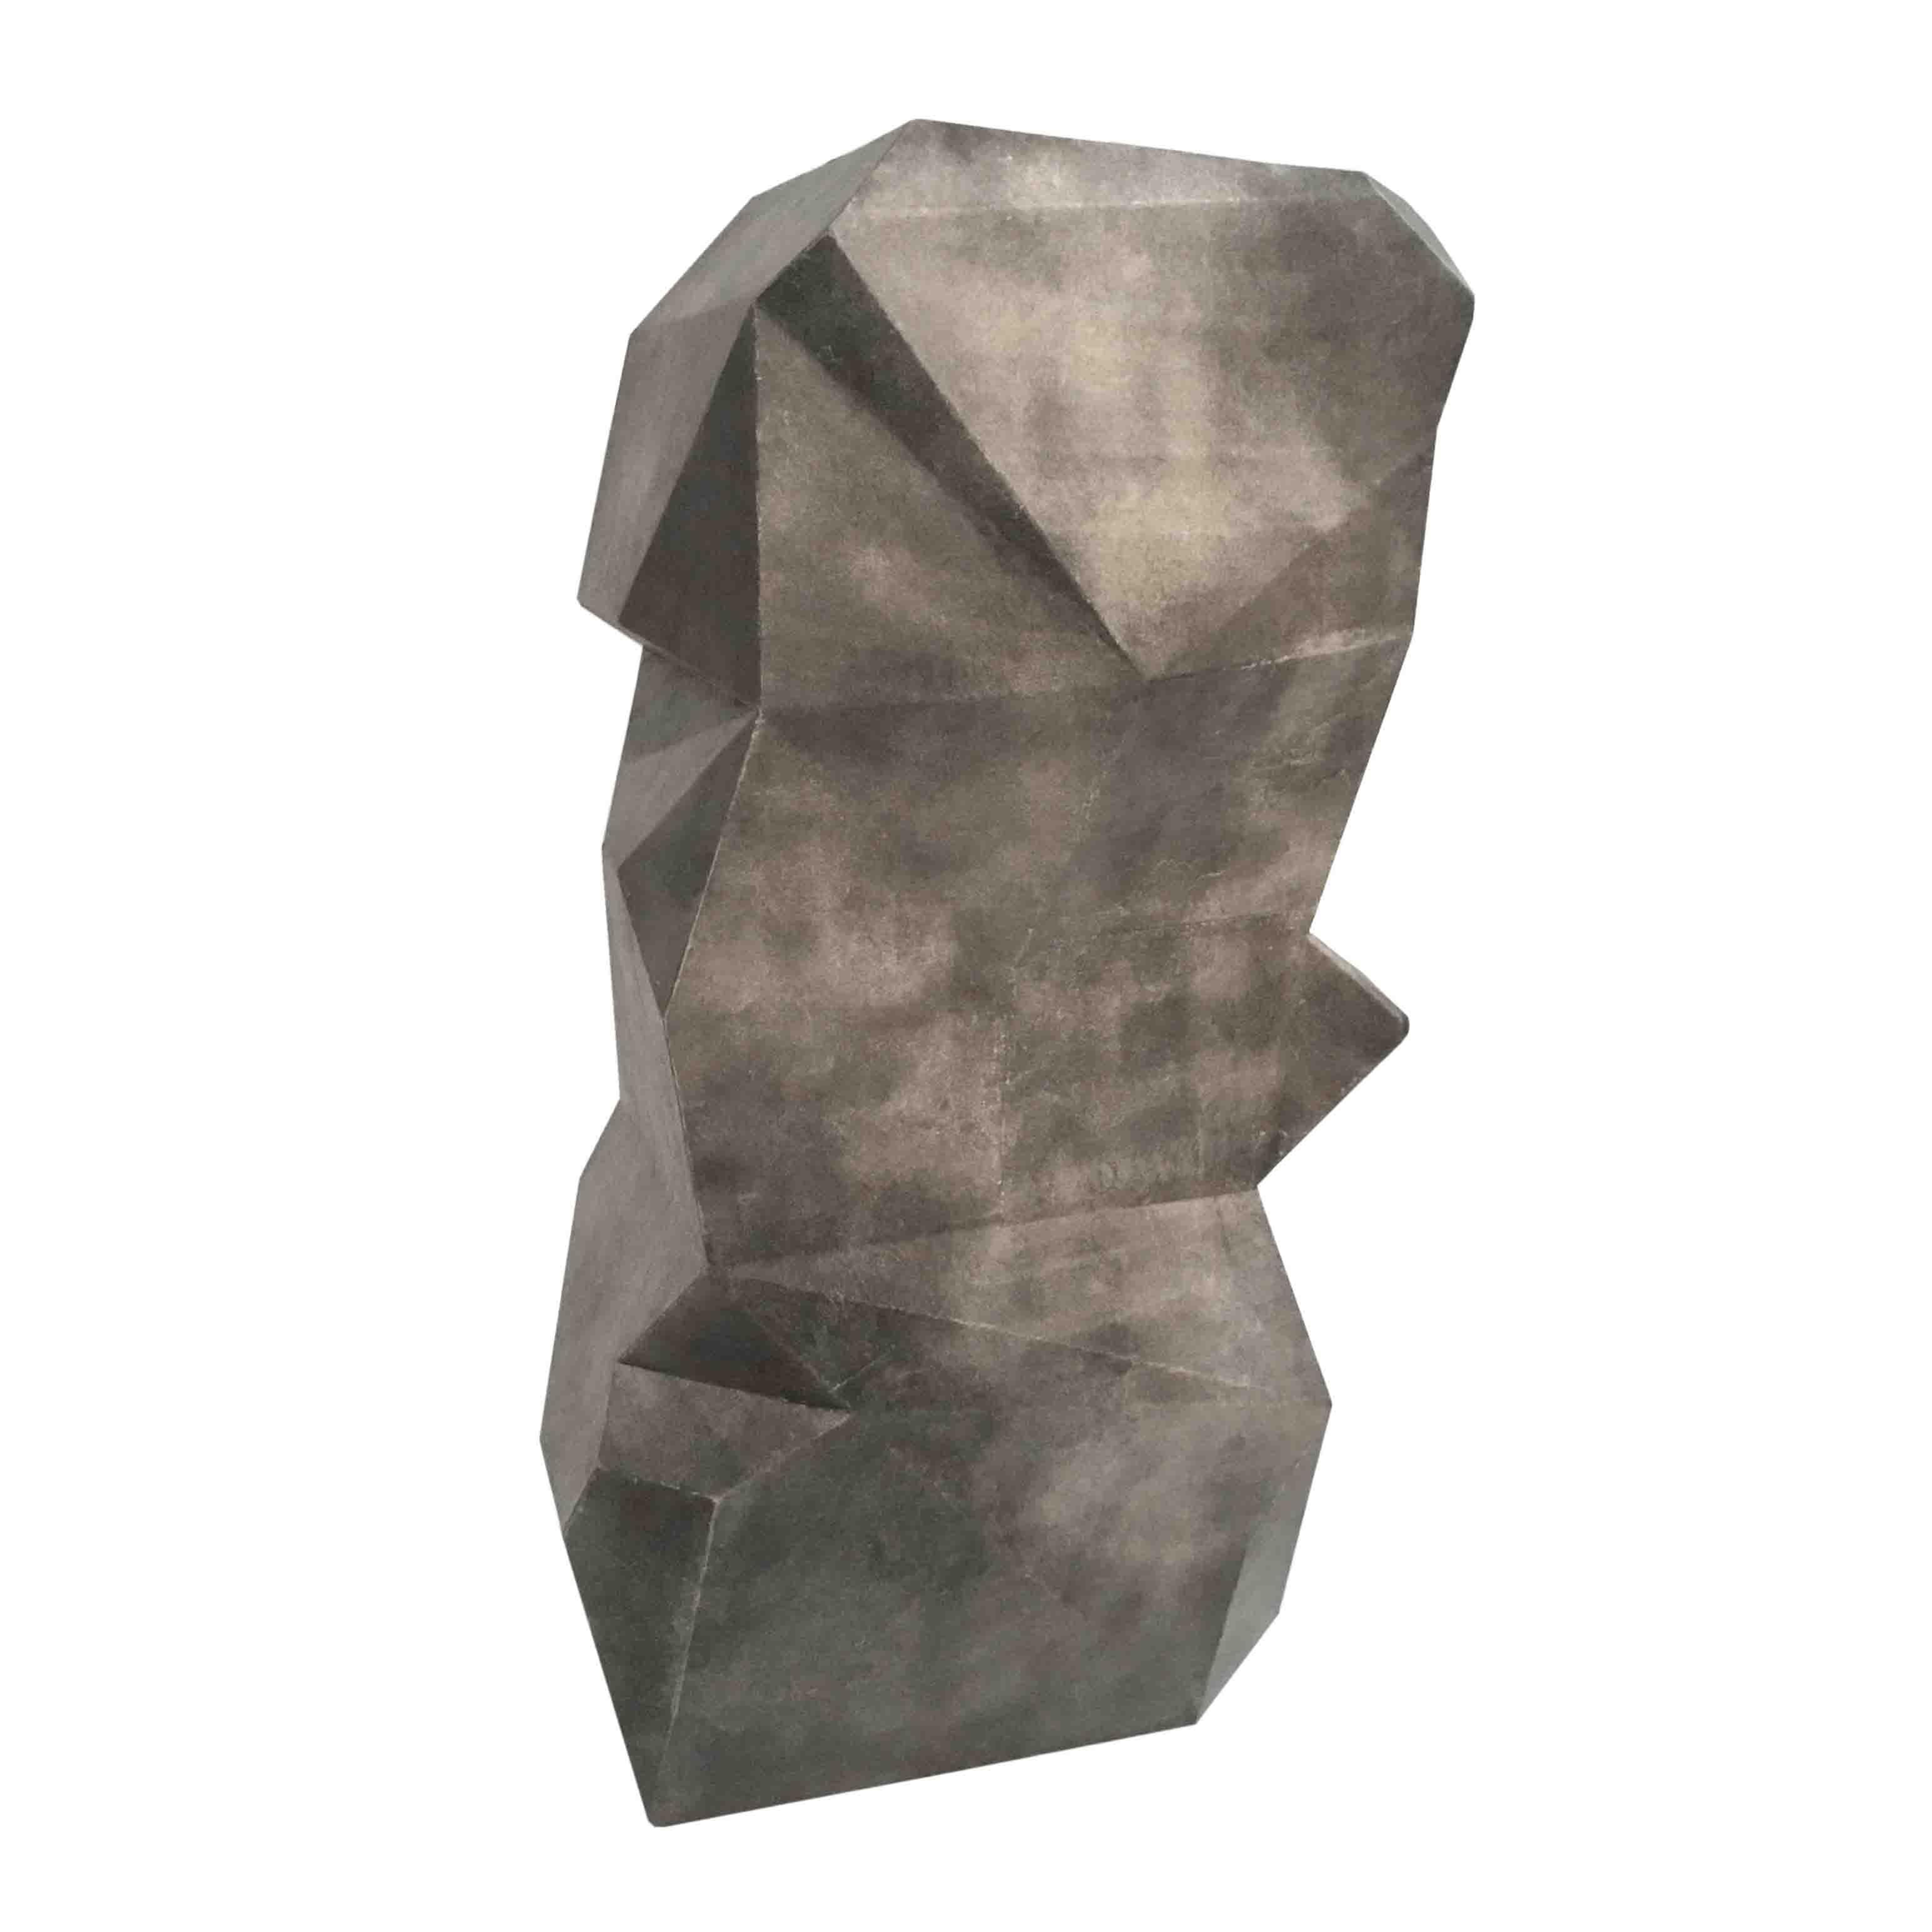 Hand-Crafted Mid-Century Modern Abstract Brutalist Pedestal Sculpture For Sale